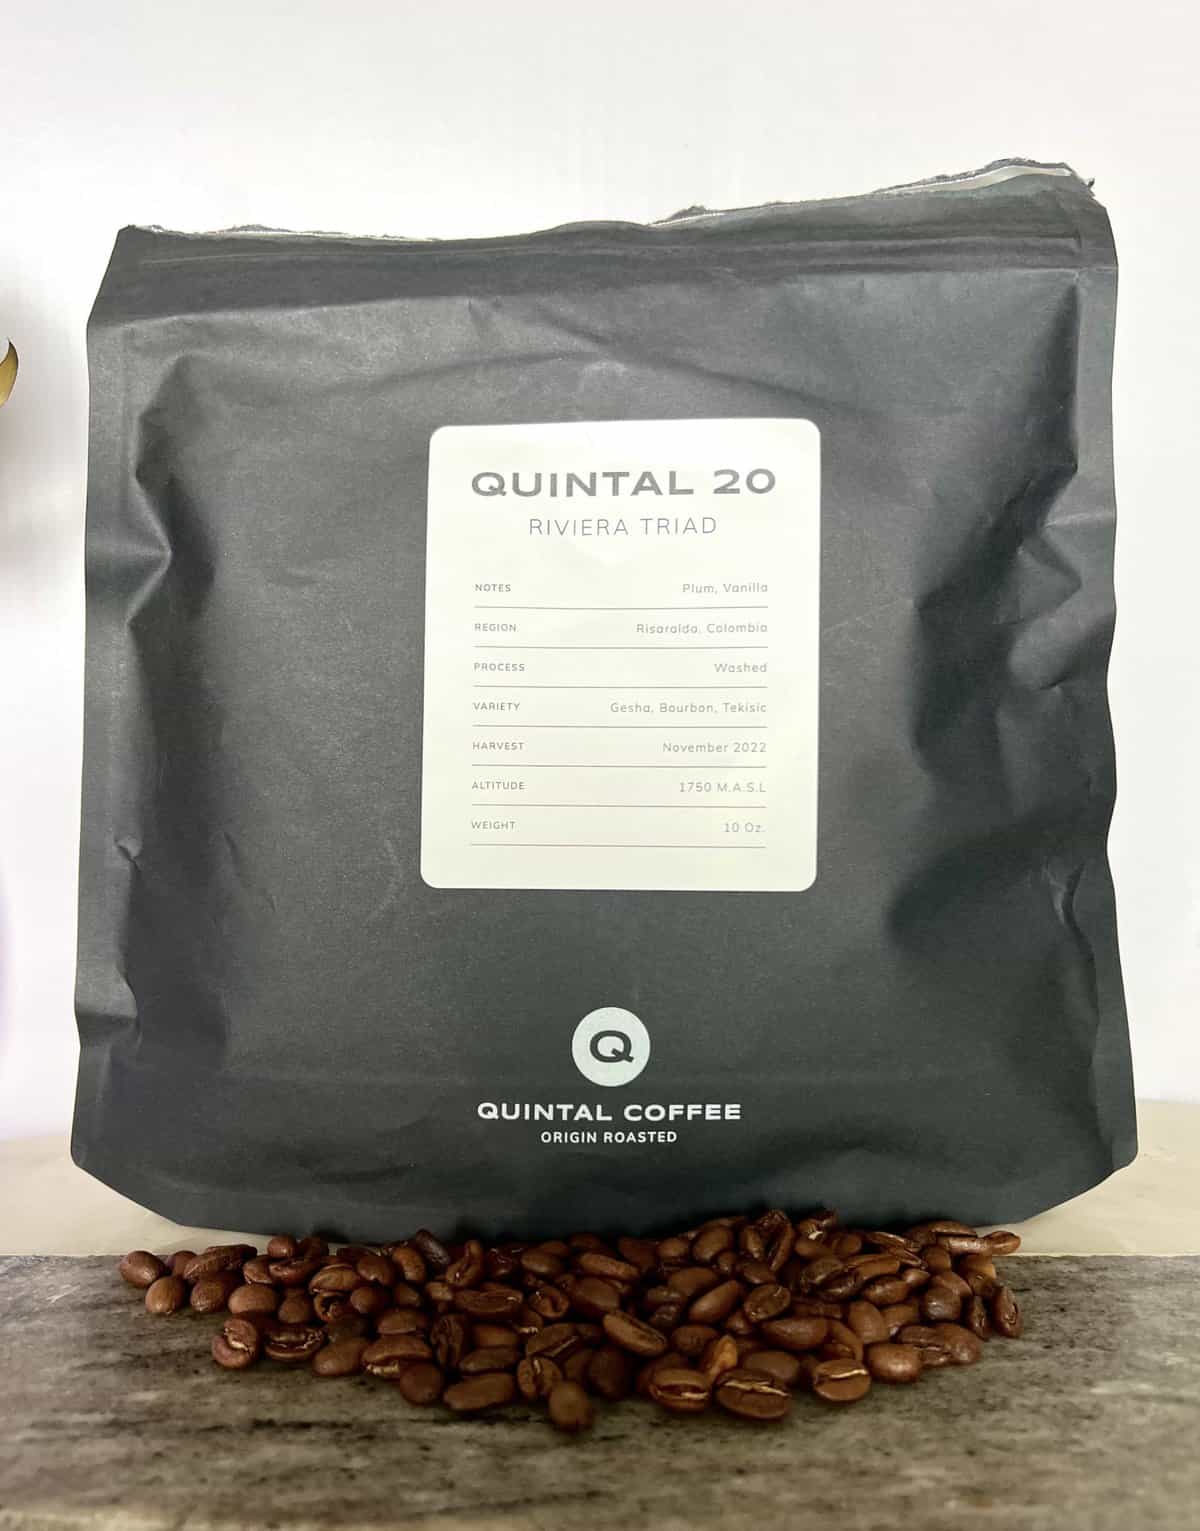 Coffee-Quintal-No.-20-Riviera-Triad-stands-on-coffee-beans-scaled